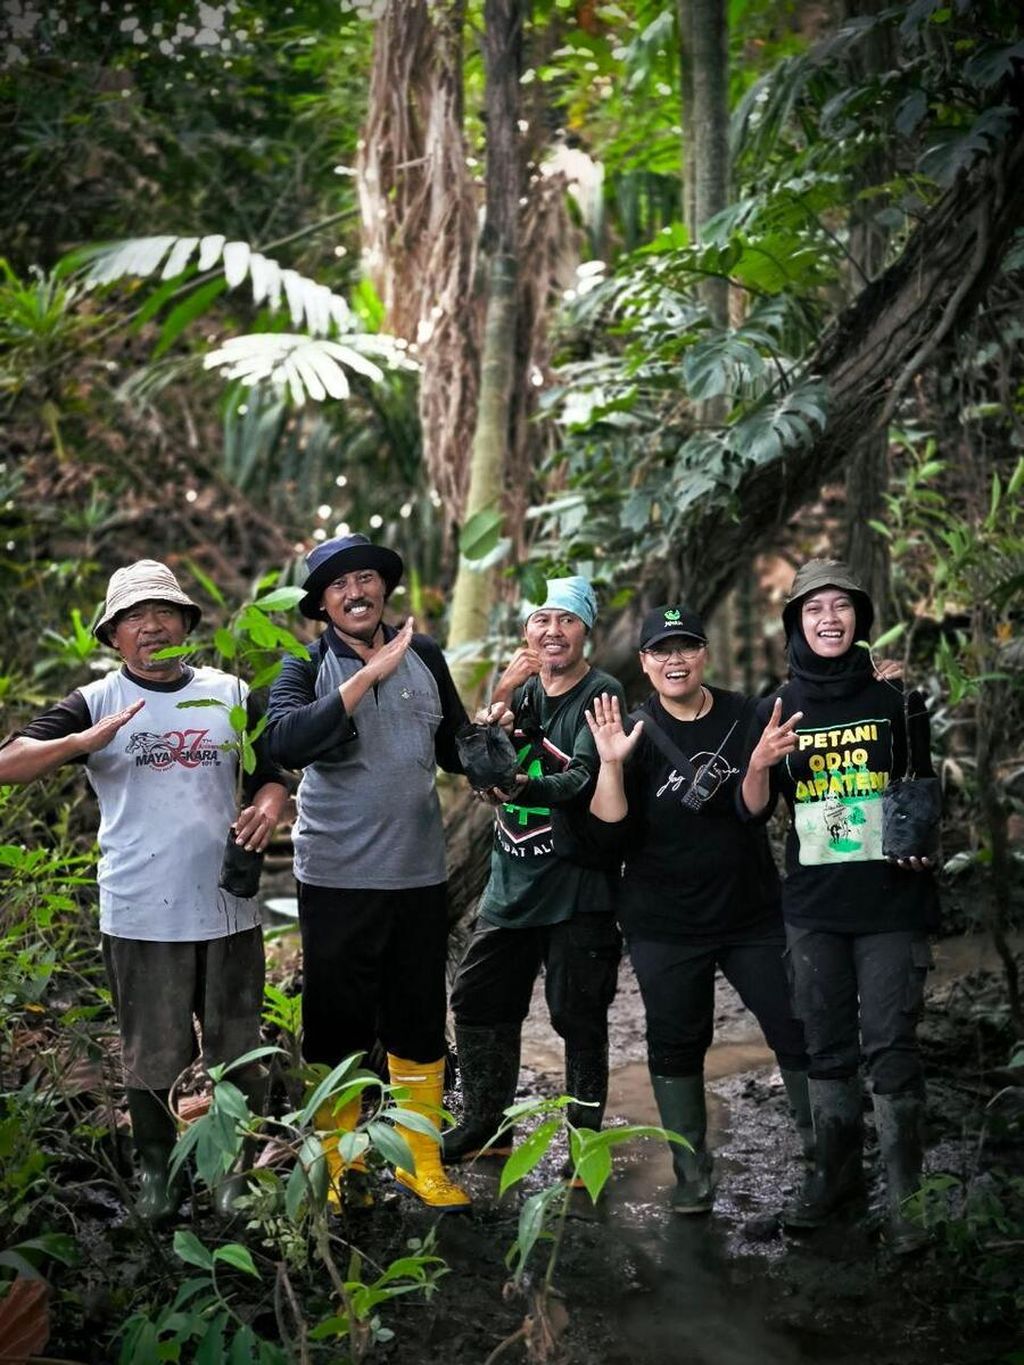 Fainta Susilo Negoro (second from the right) is pictured with volunteer friends after performing restoration work at a location in Java Island, some time ago.